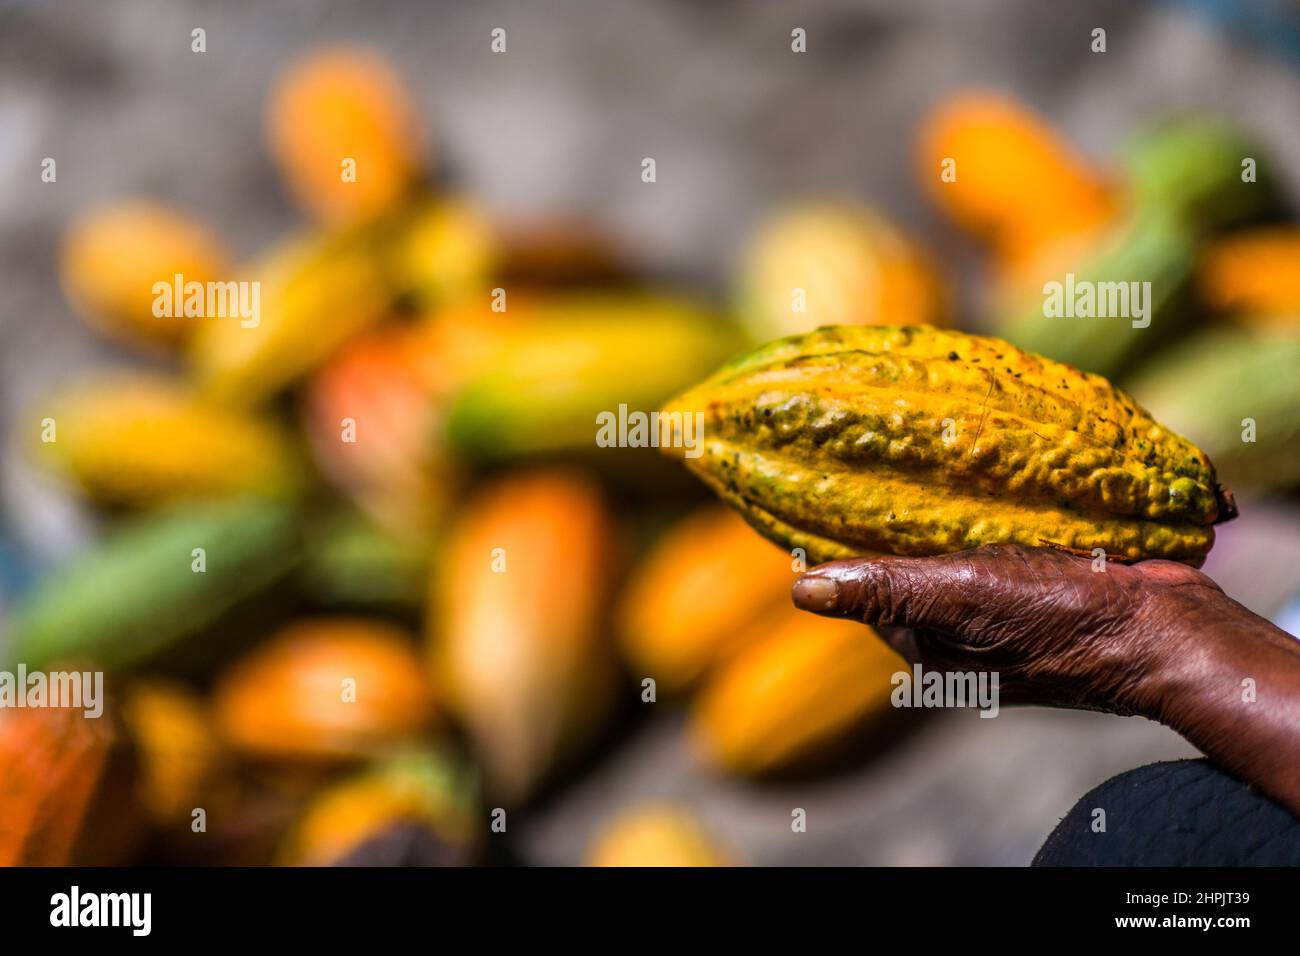 A freshly harvested, ripe cacao pod is seen being held in a hand on a traditional cacao farm in Cuernavaca, Cauca, Colombia. Stock Photo